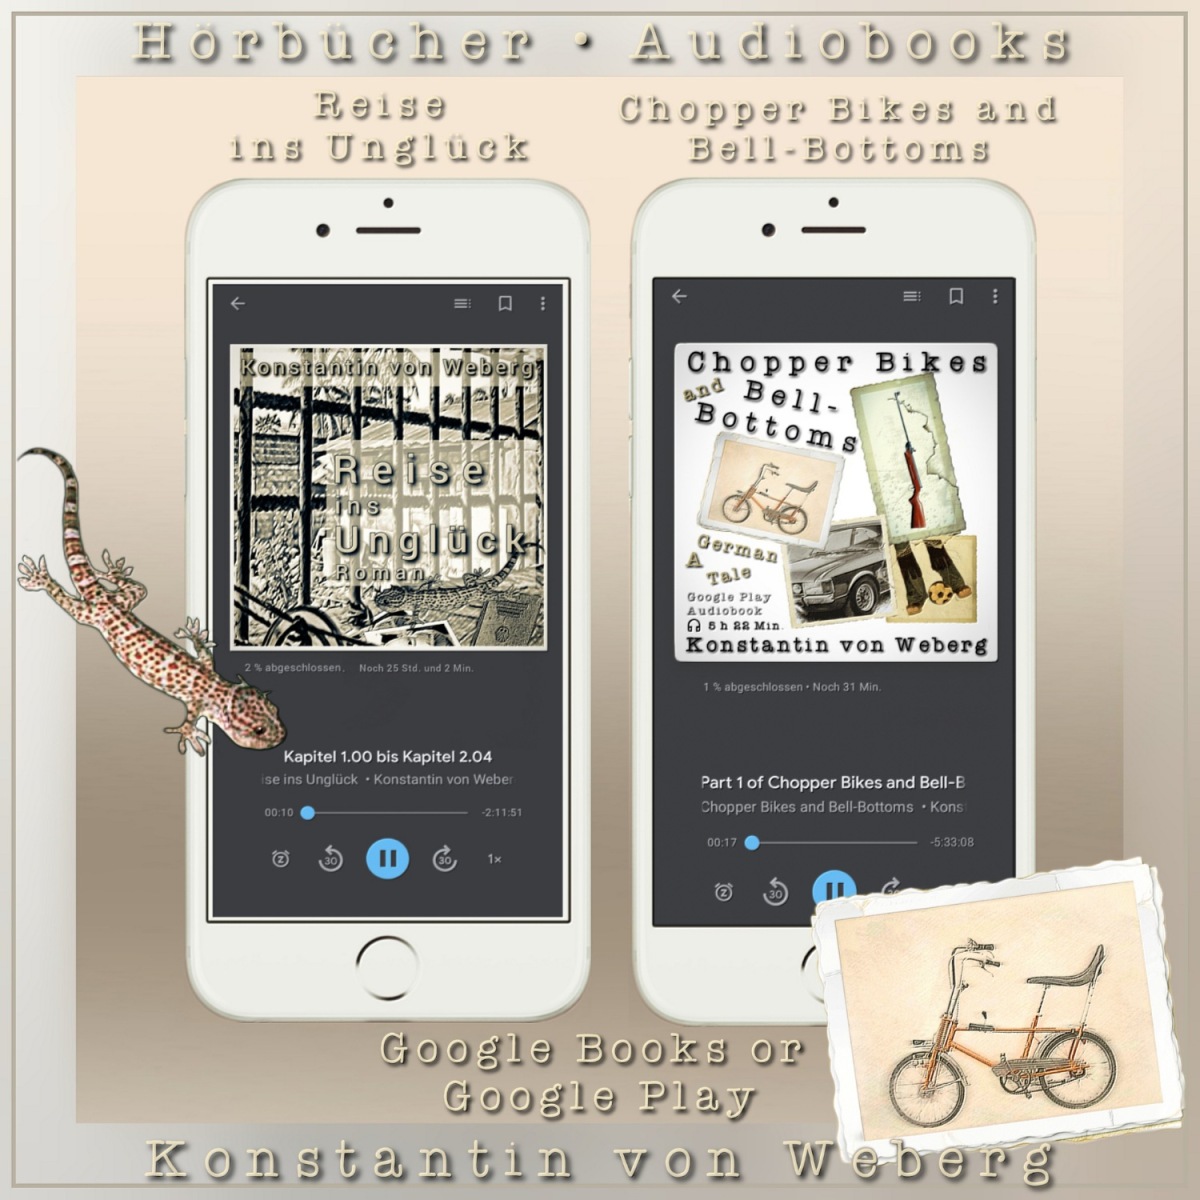 AUDIOBOOK! Chopper Bikes and Bell-Bottoms. Listen to the sample here! Ebook also available.